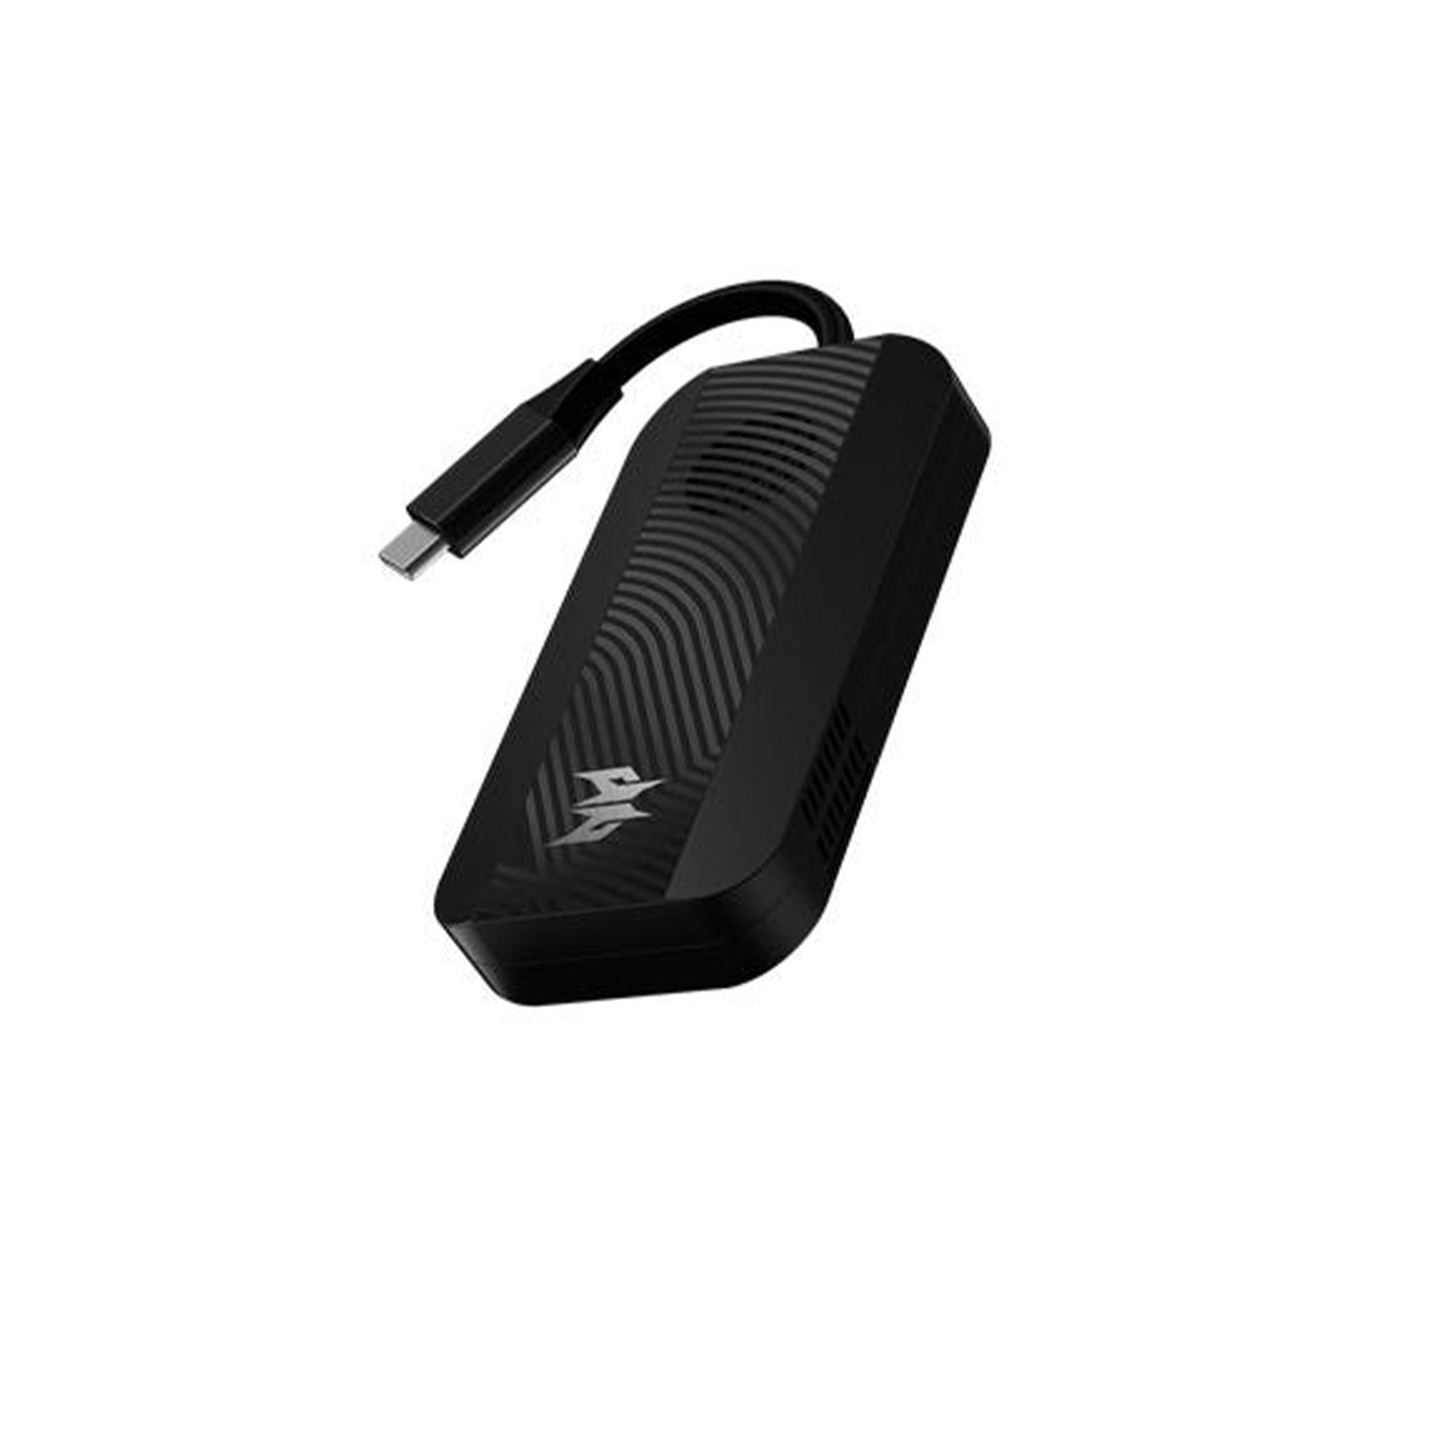 Predator Gaming Portable 5G Dongle | Connect D5